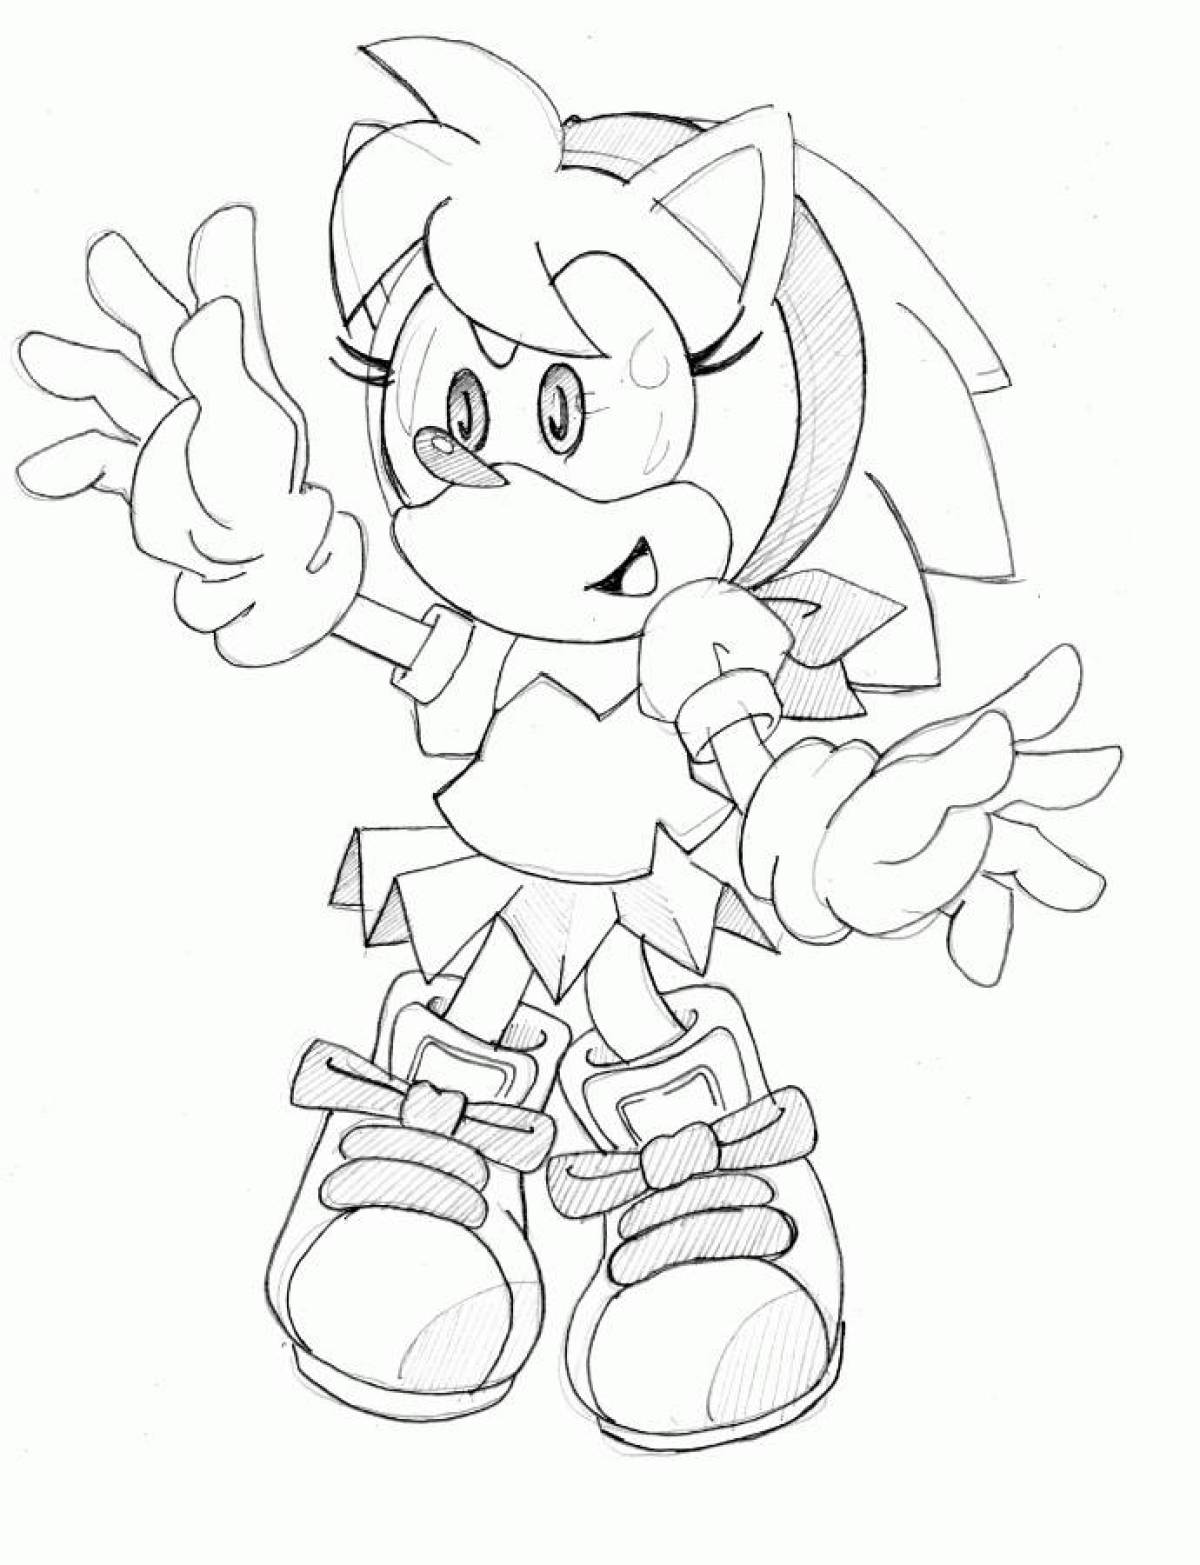 Amy rose's vibrant coloring page